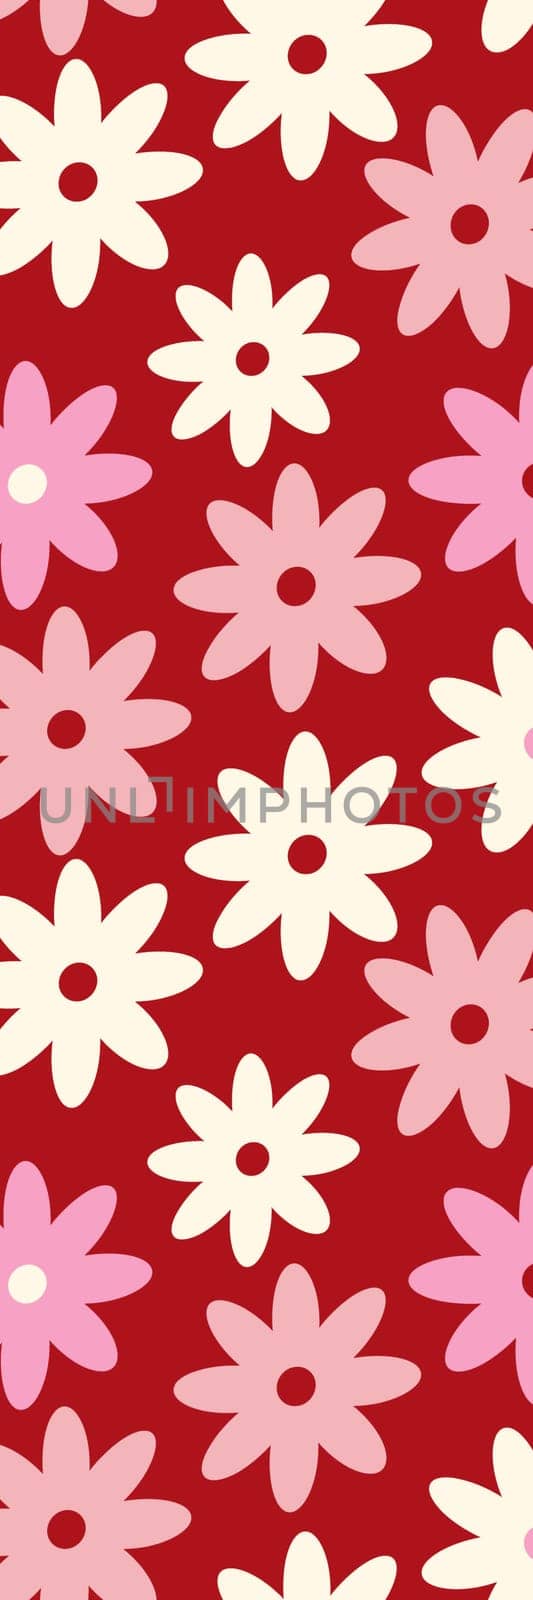 Red floral cute printable bookmark with spring flowers